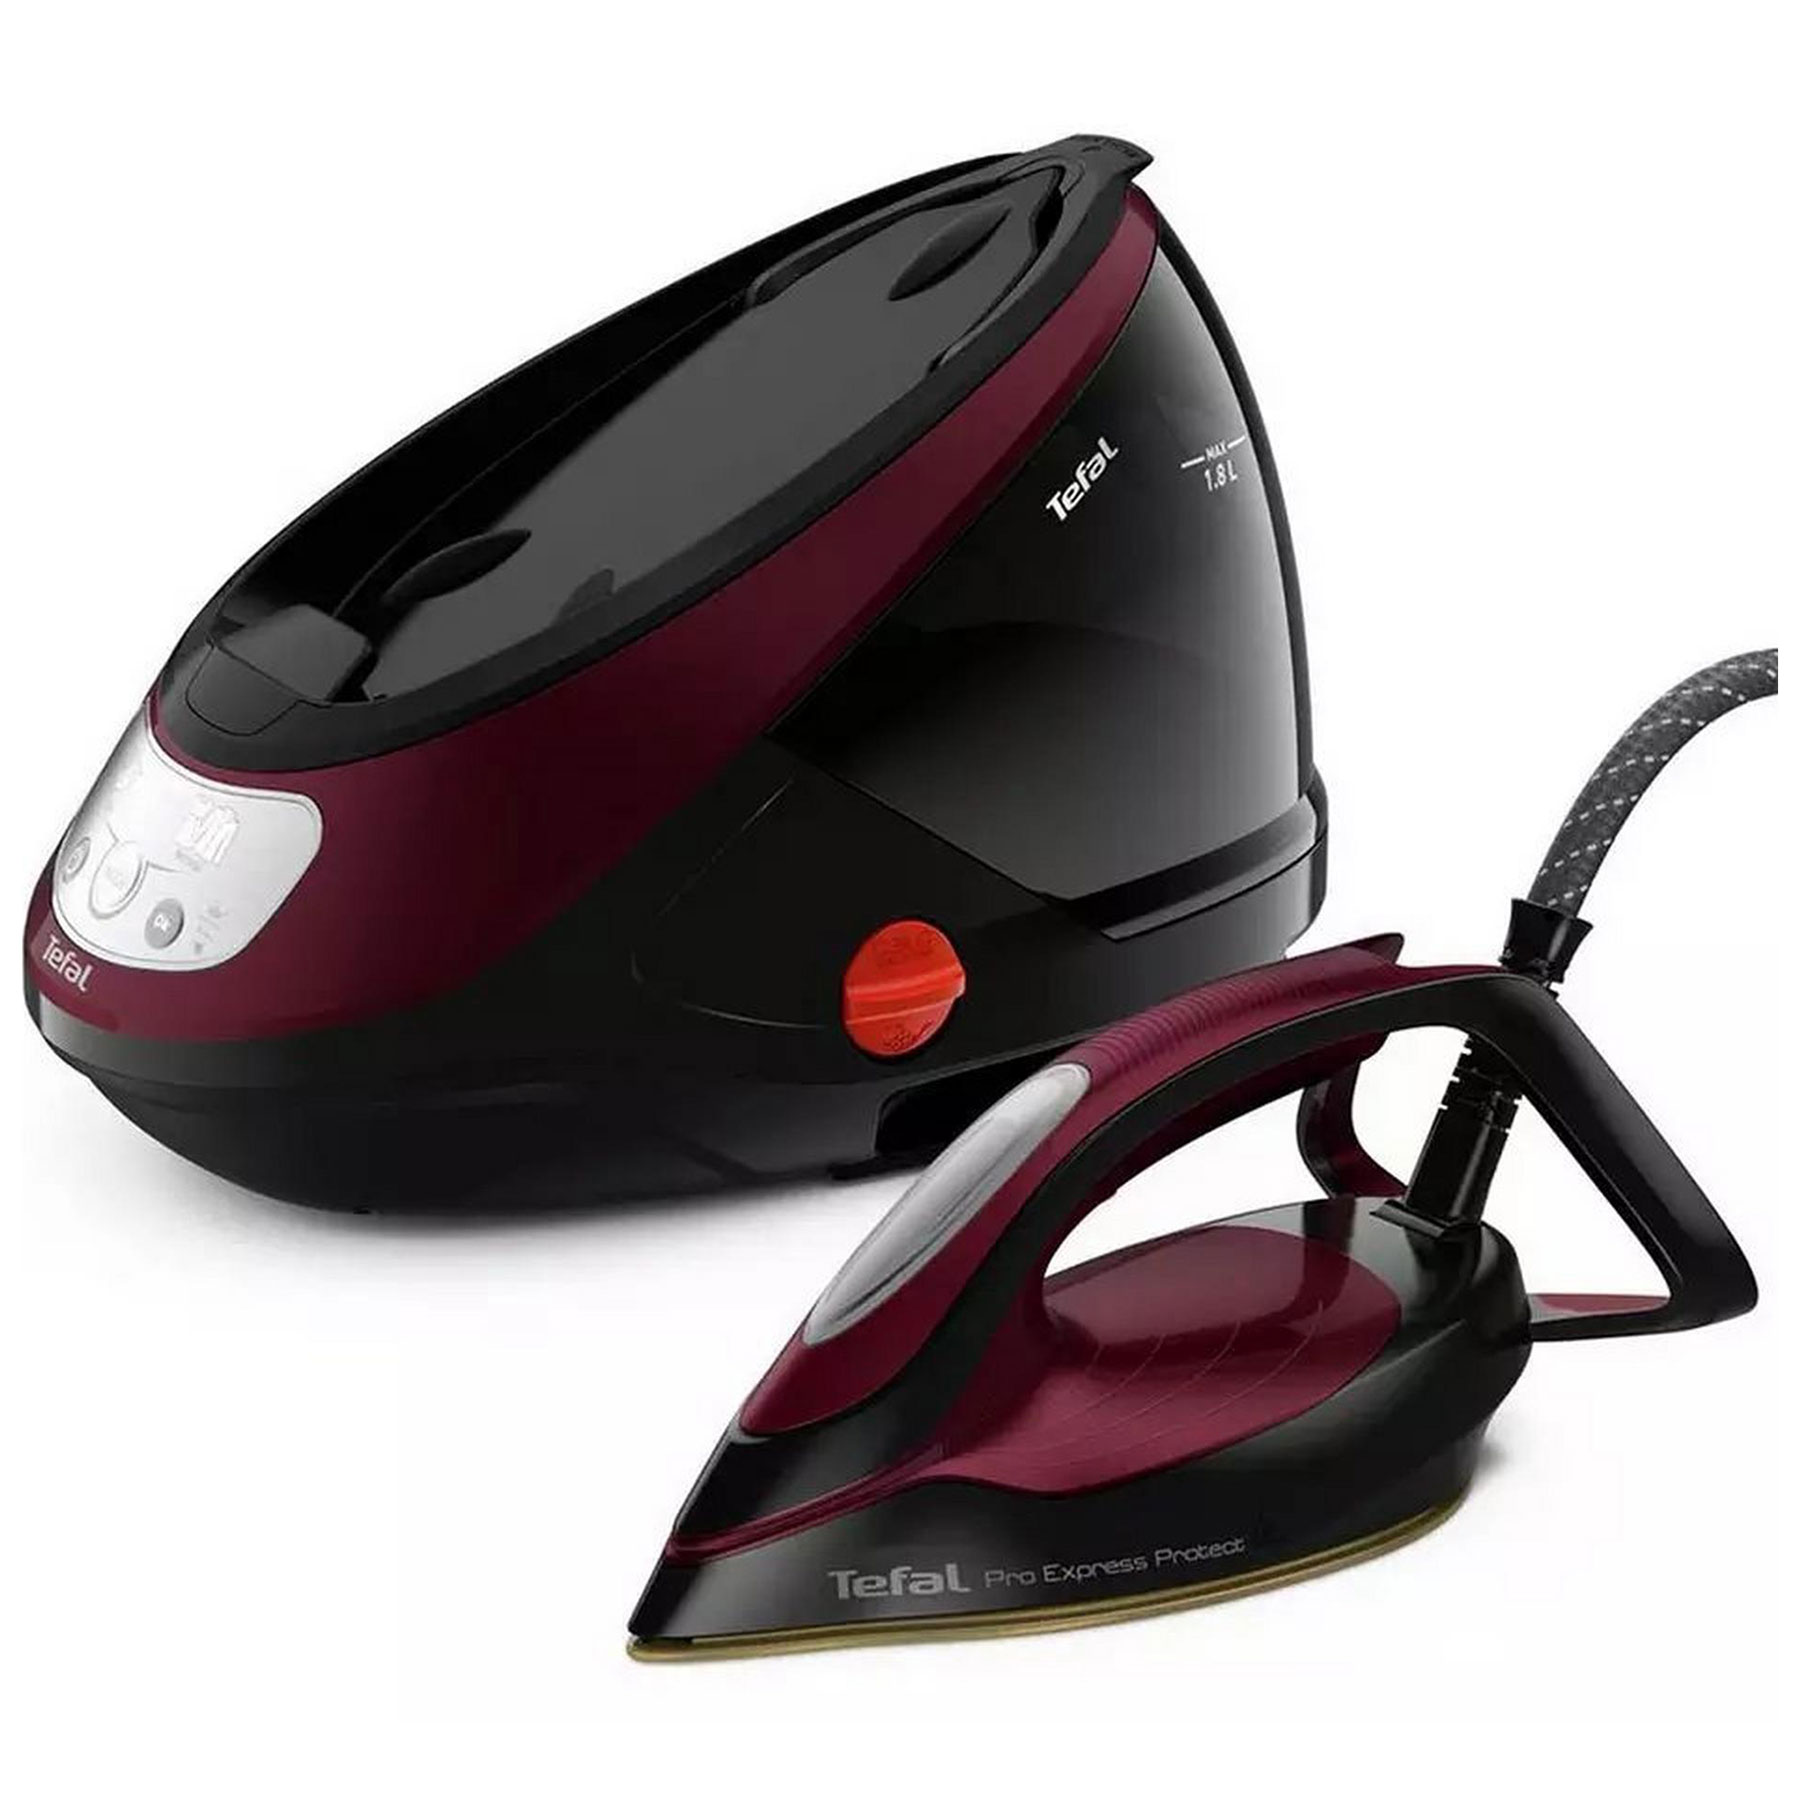 Tefal GV9230G0 Pro Express Protect High Pressure Steam Generator Iron